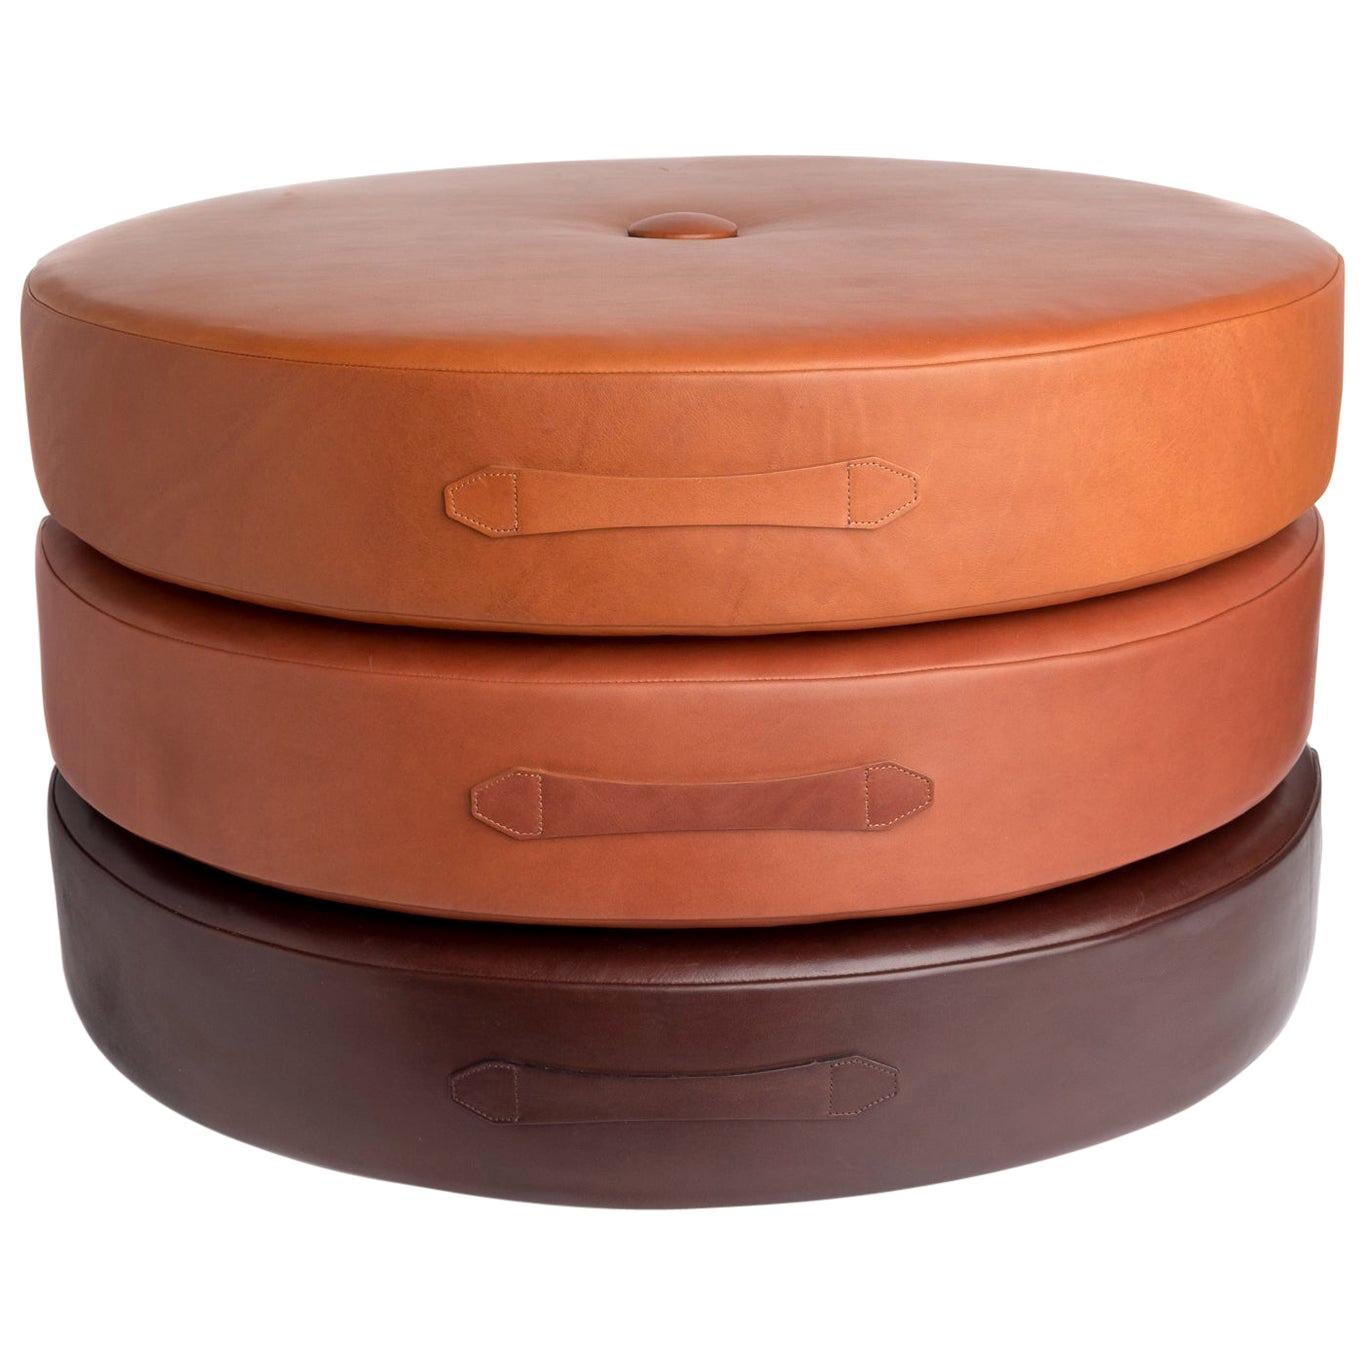 30"Ø Leather Drum Stacking Floor Cushion (Set of 3) by Moses Nadel